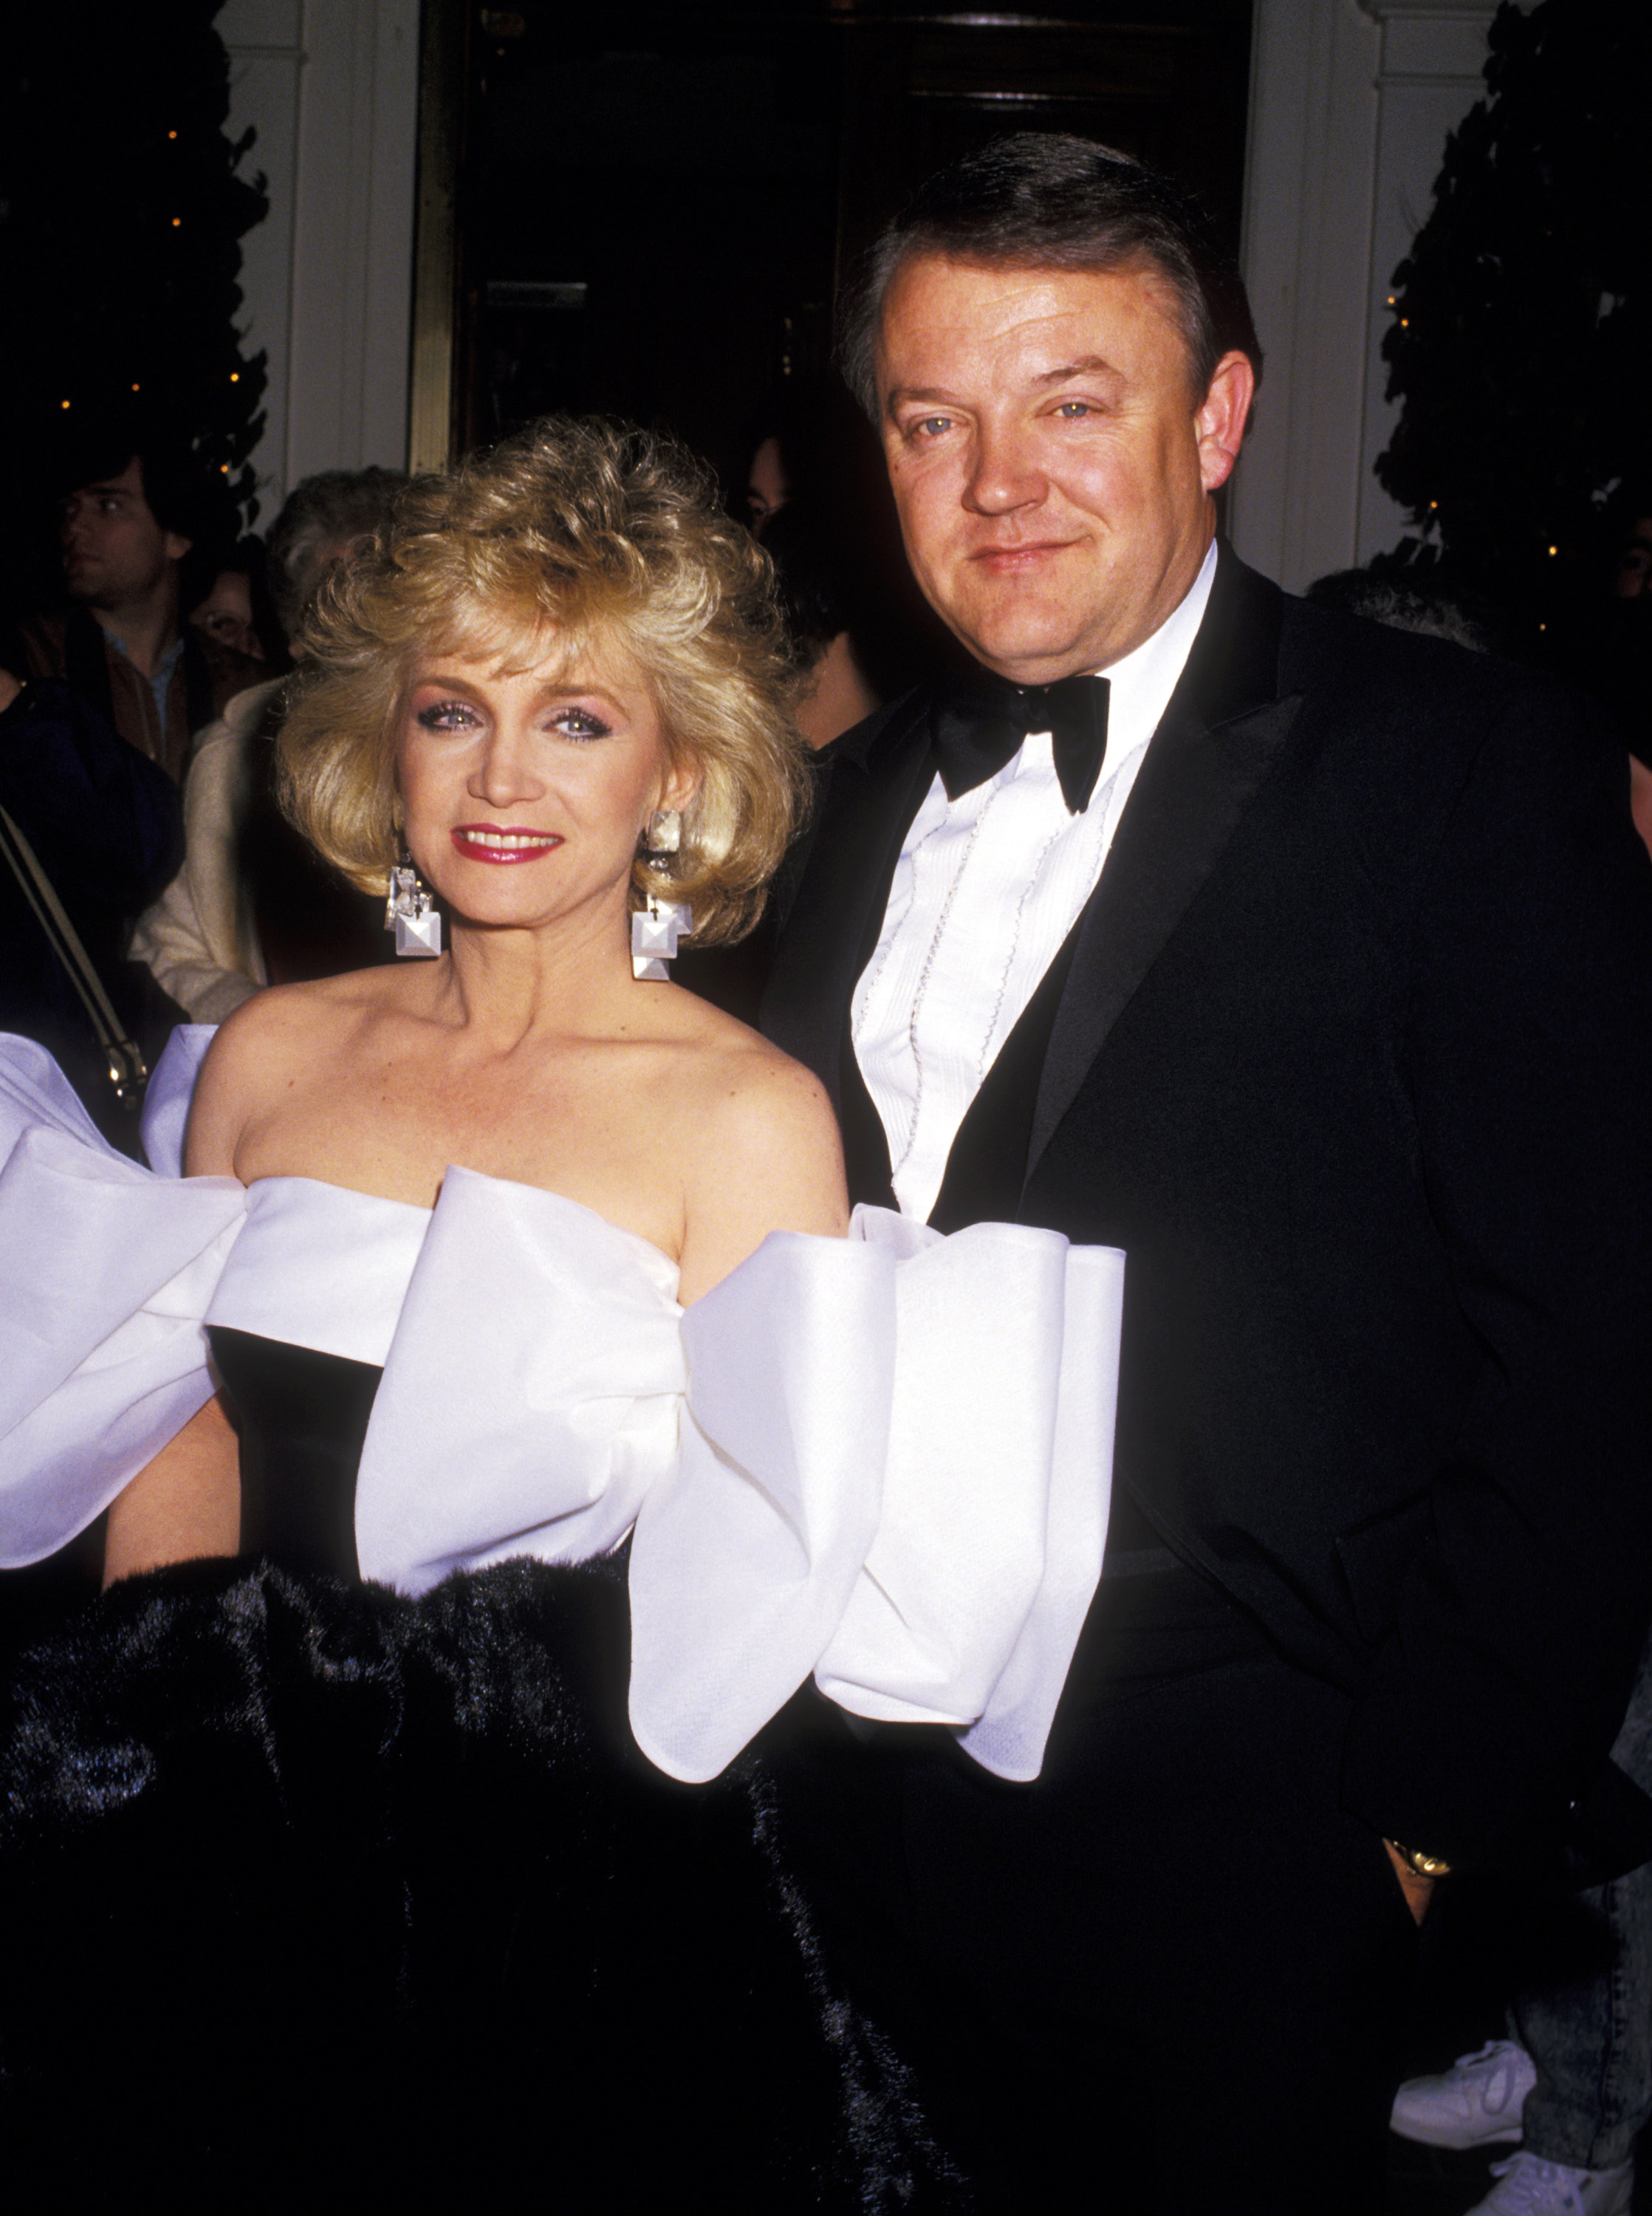 Barbara Mandrell and Ken Dudney during the 13th Annual People's Choice Awards in Santa Monica, California, on March 15, 1987. | Source: Getty Images